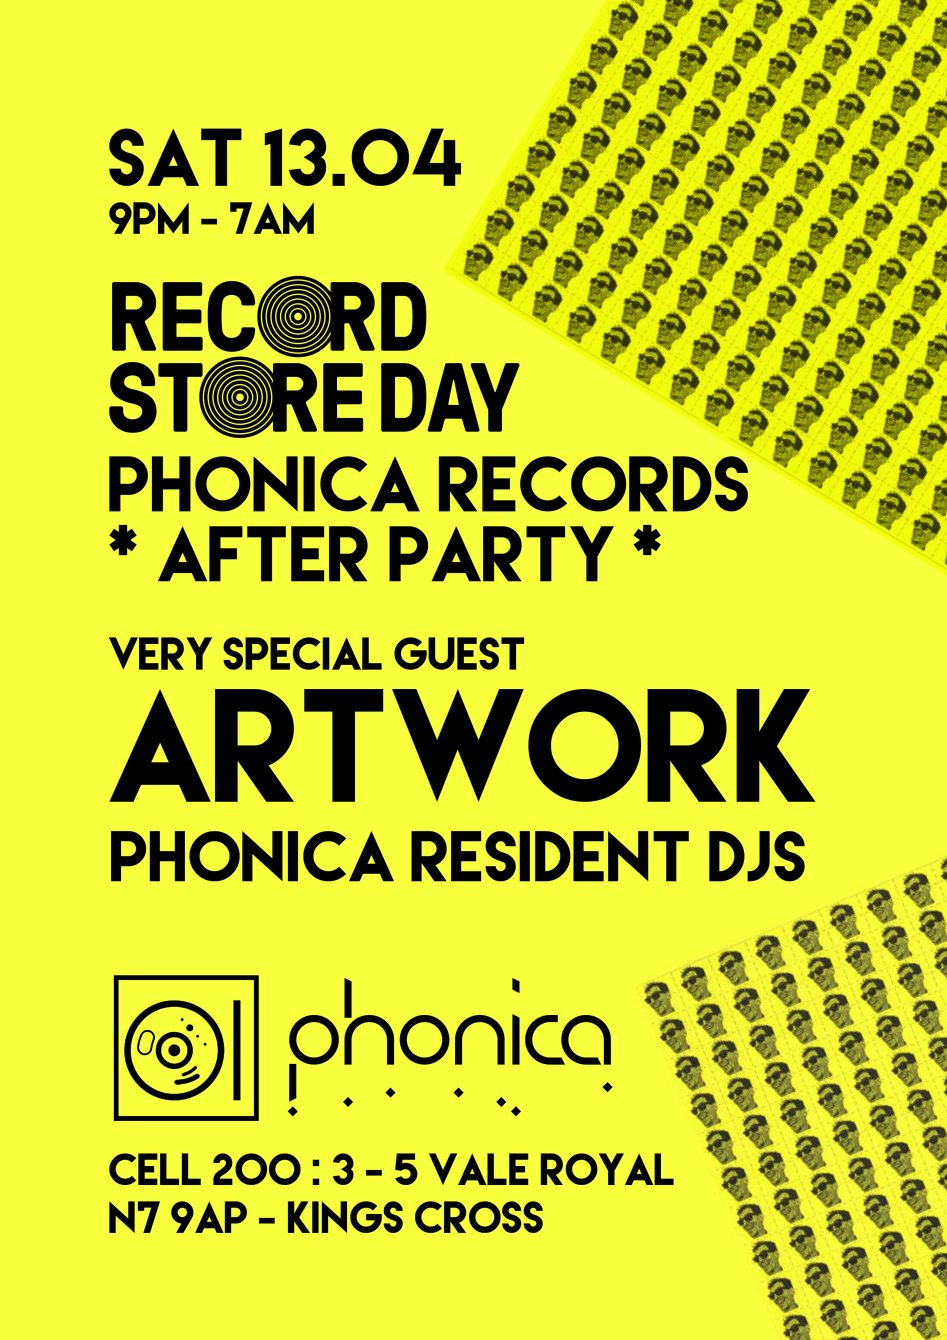 Phonica Records with Artwork (Record Store Day After Party) - Flyer front